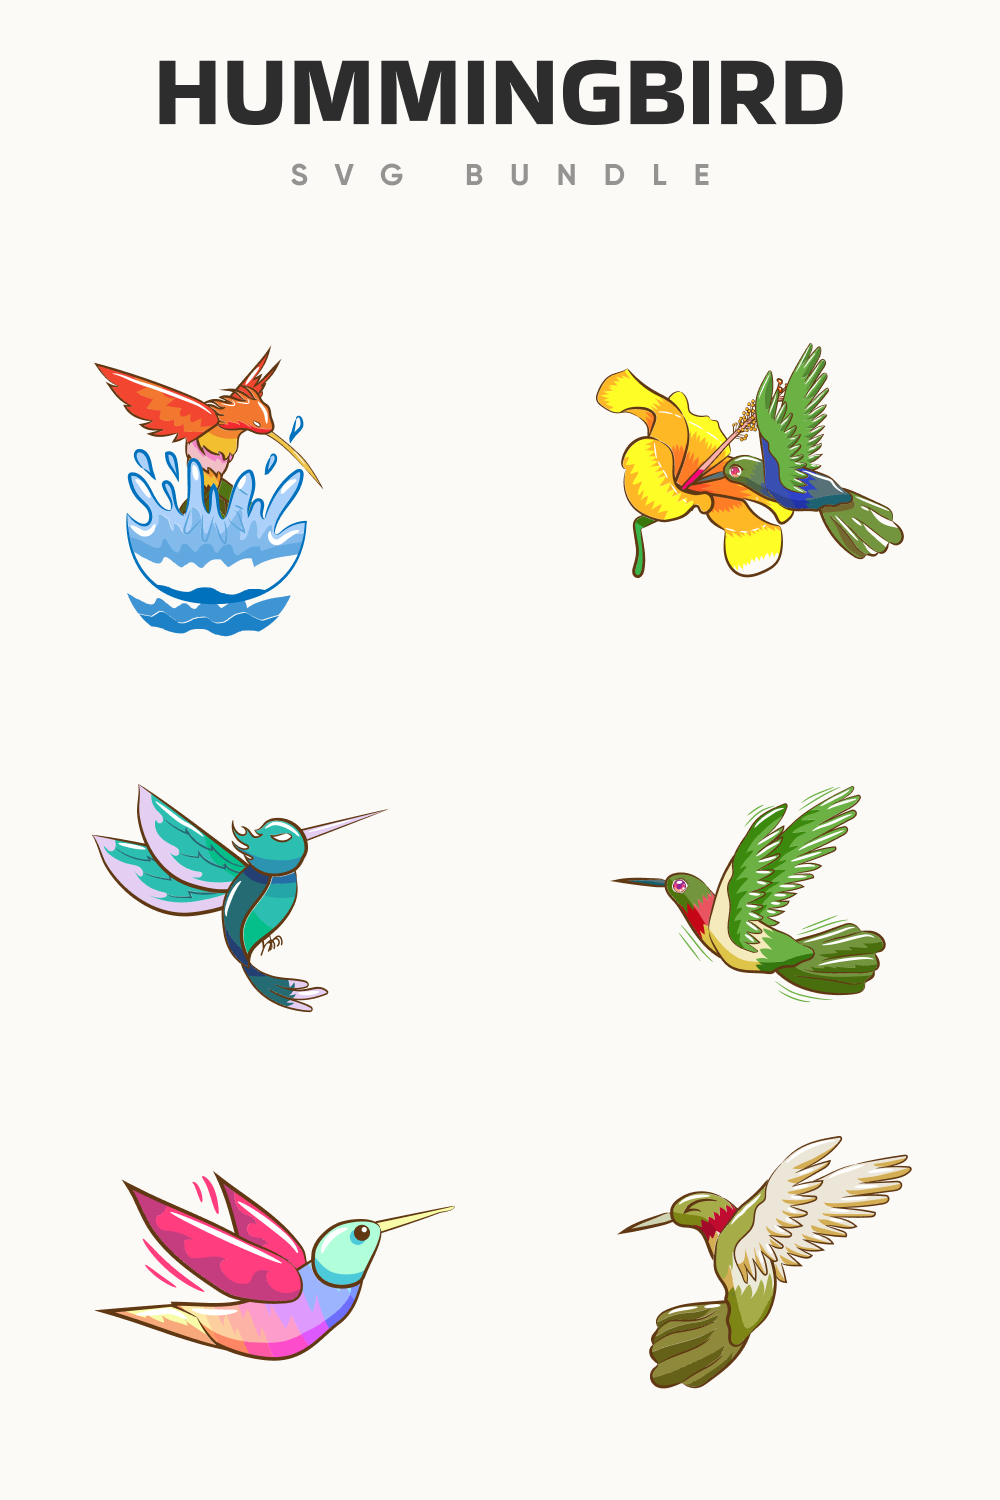 So colorful and delicate birds.